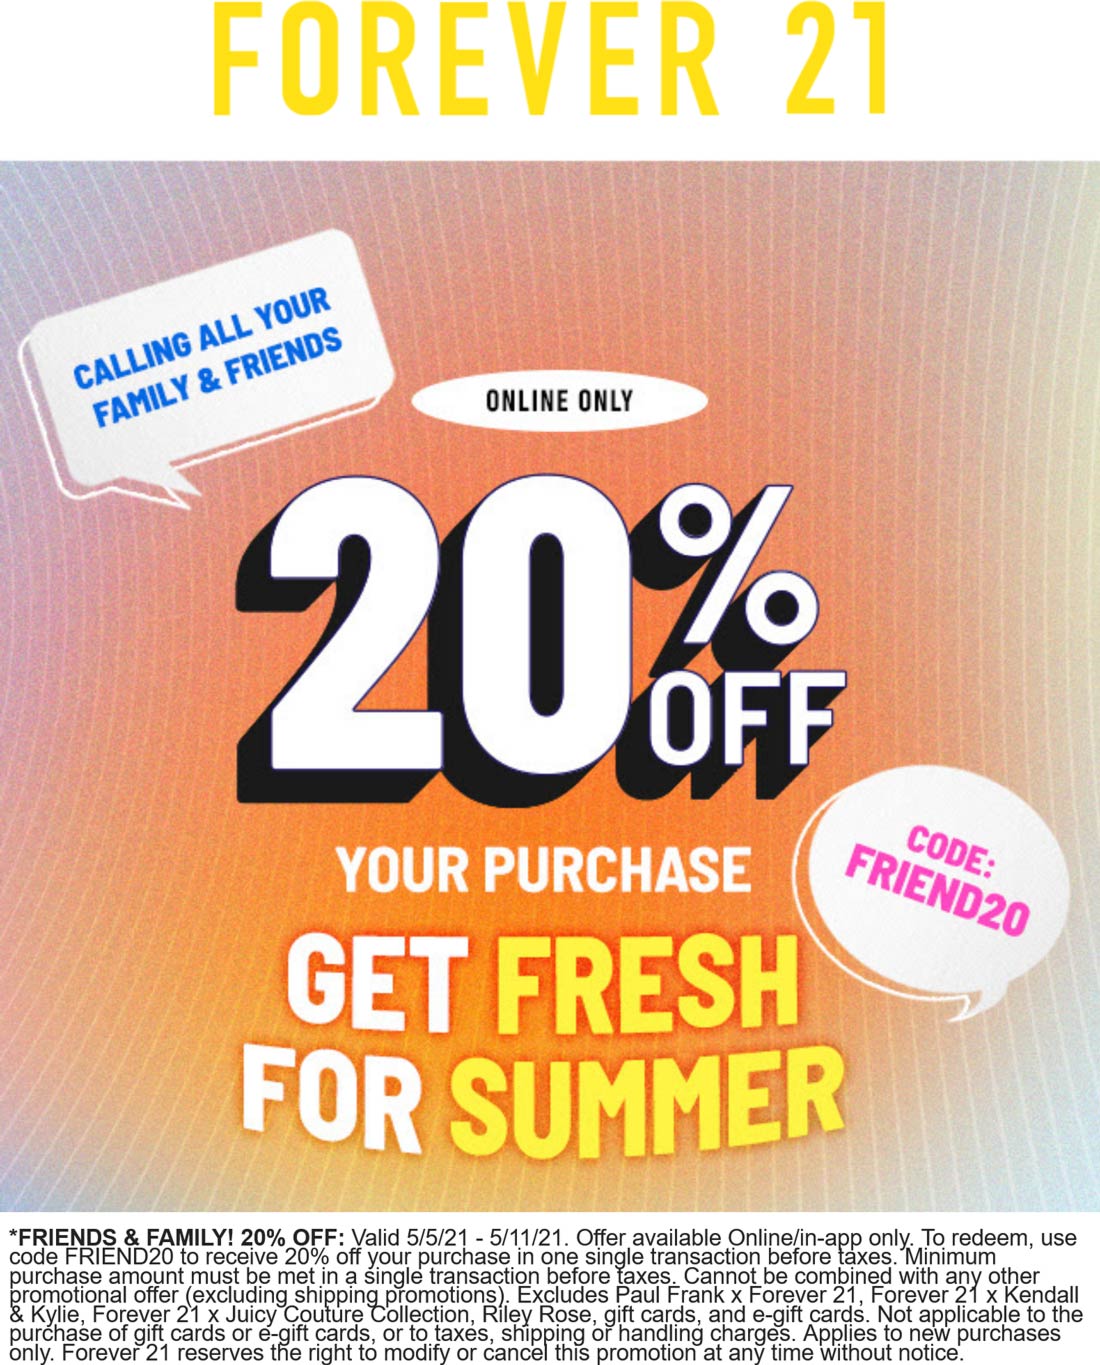 20% off online at Forever 21 via promo code FRIEND20 #forever21 The